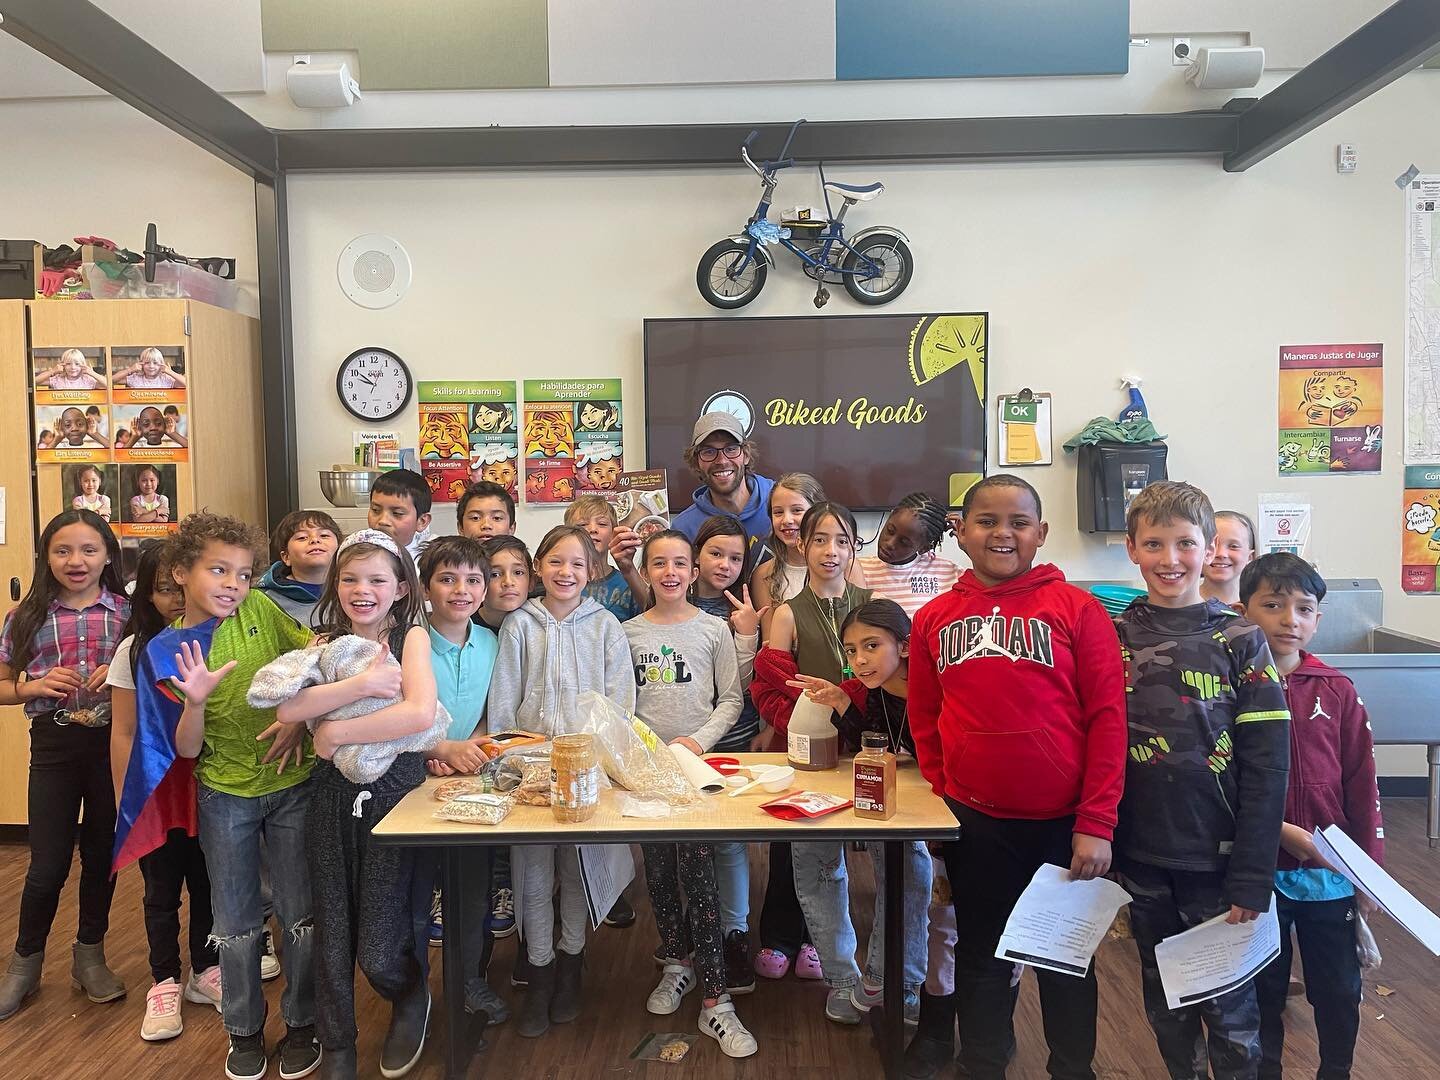 Round 2 of energy bar-making action from the 3rd grade Discovery Lab Class at @silverthorneelementary 

Quality nutrition and exercise are the building blocks for strong growth, healthy development, and the overall well-being of our youth.

Establish